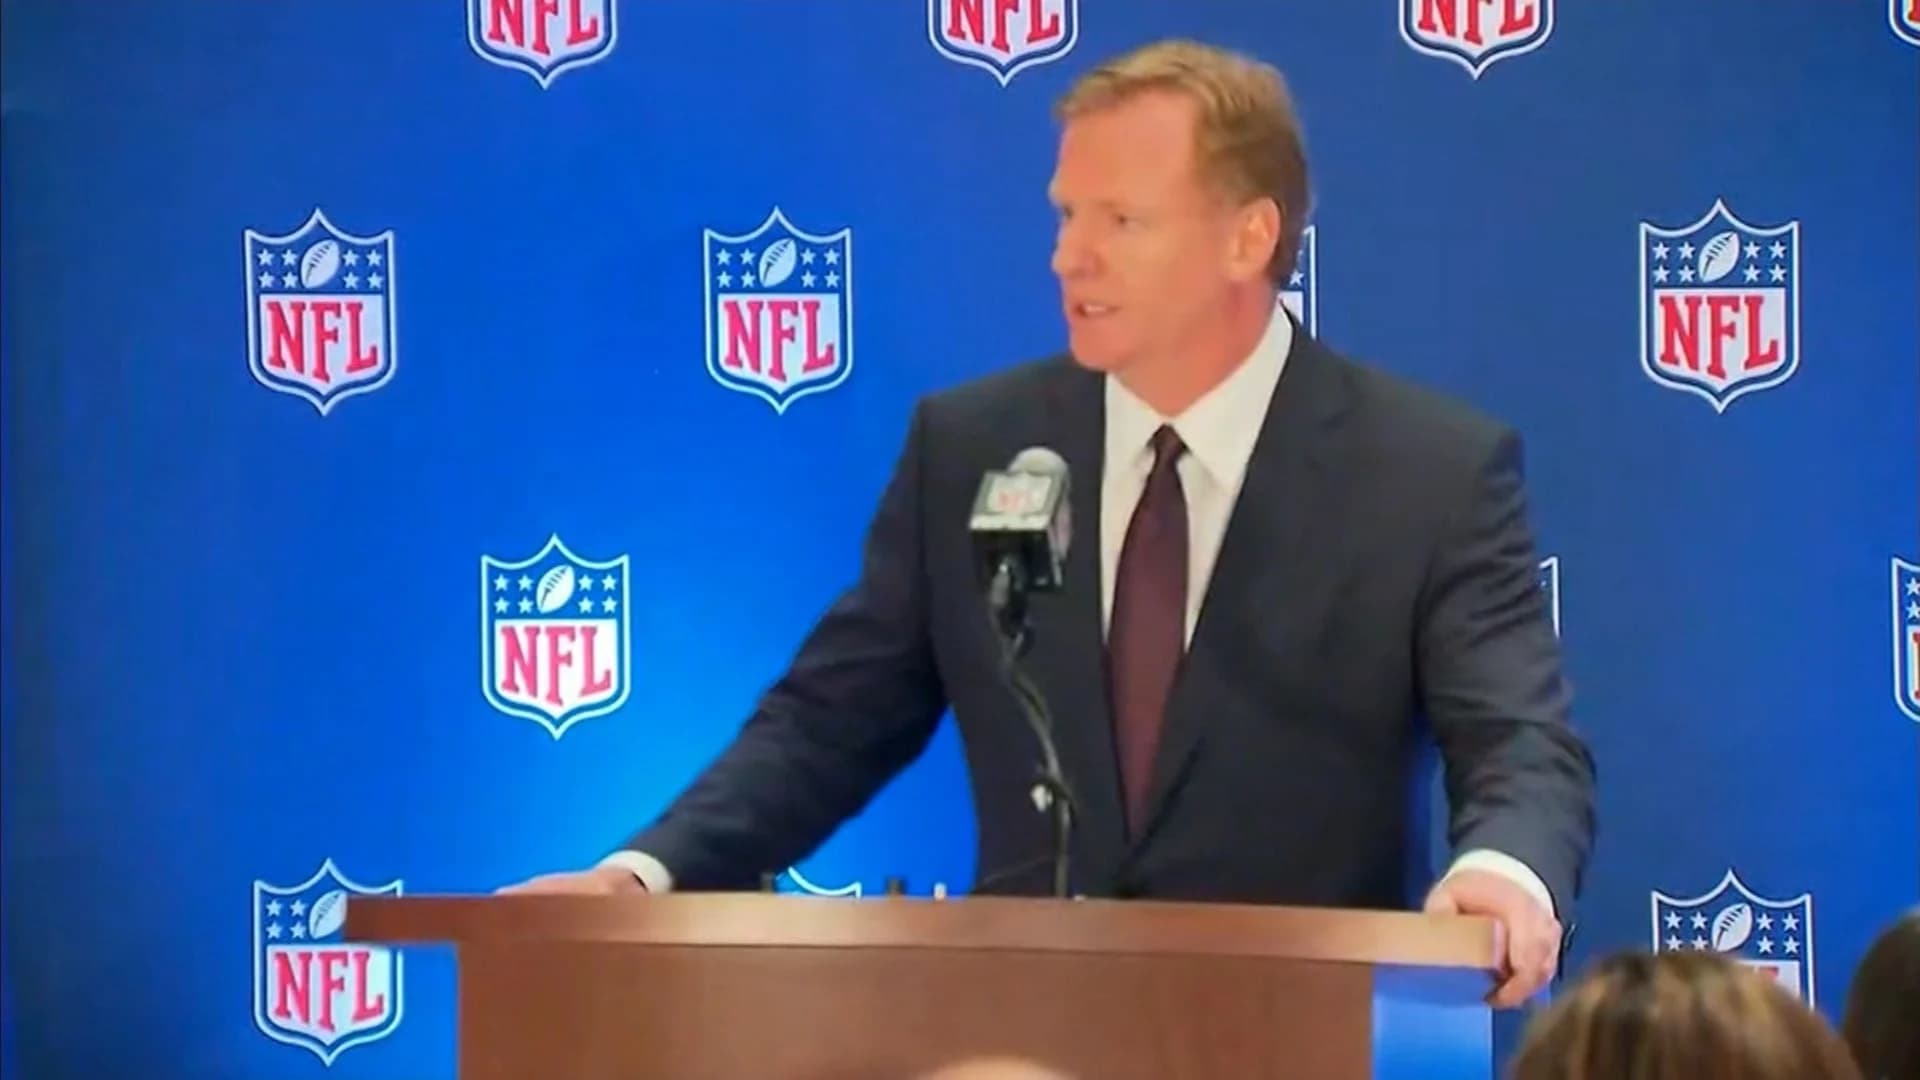 NFL owners, players have 'positive' meeting; still no policy on national anthem